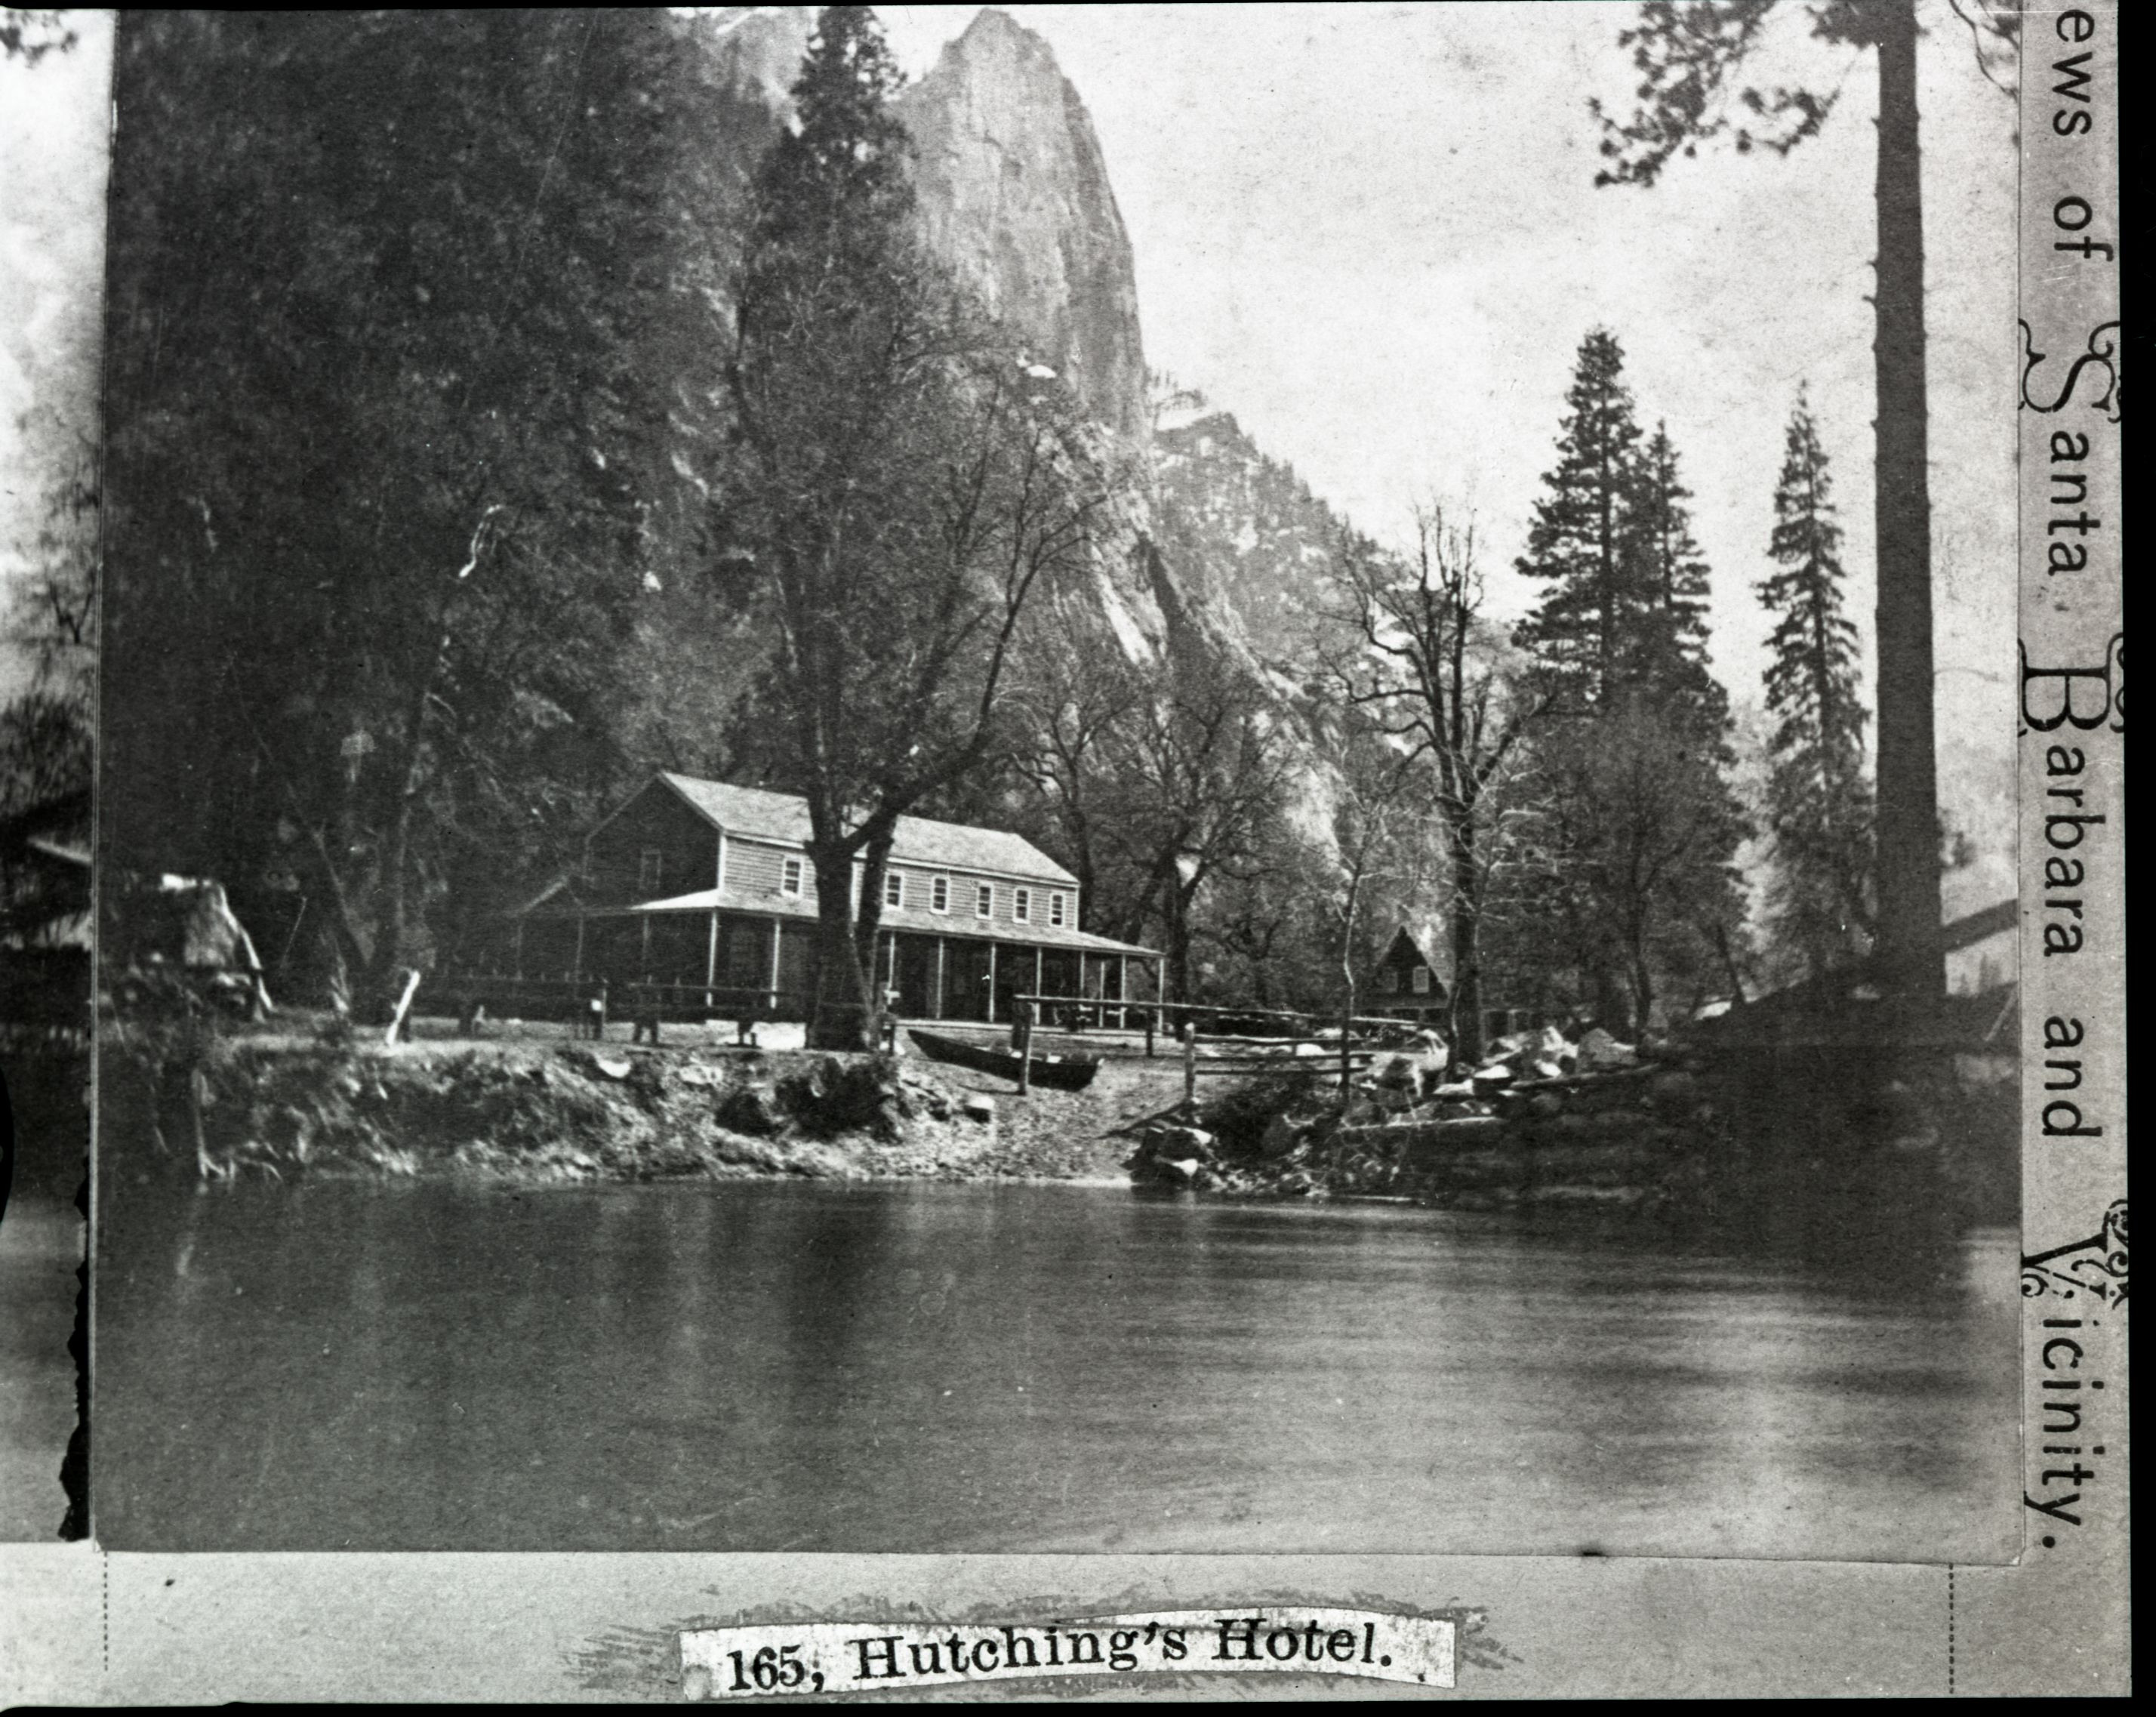 Detail of stereo (RL-16,413). Caption: "165. Hutching's Hotel". Merced River in foreground.